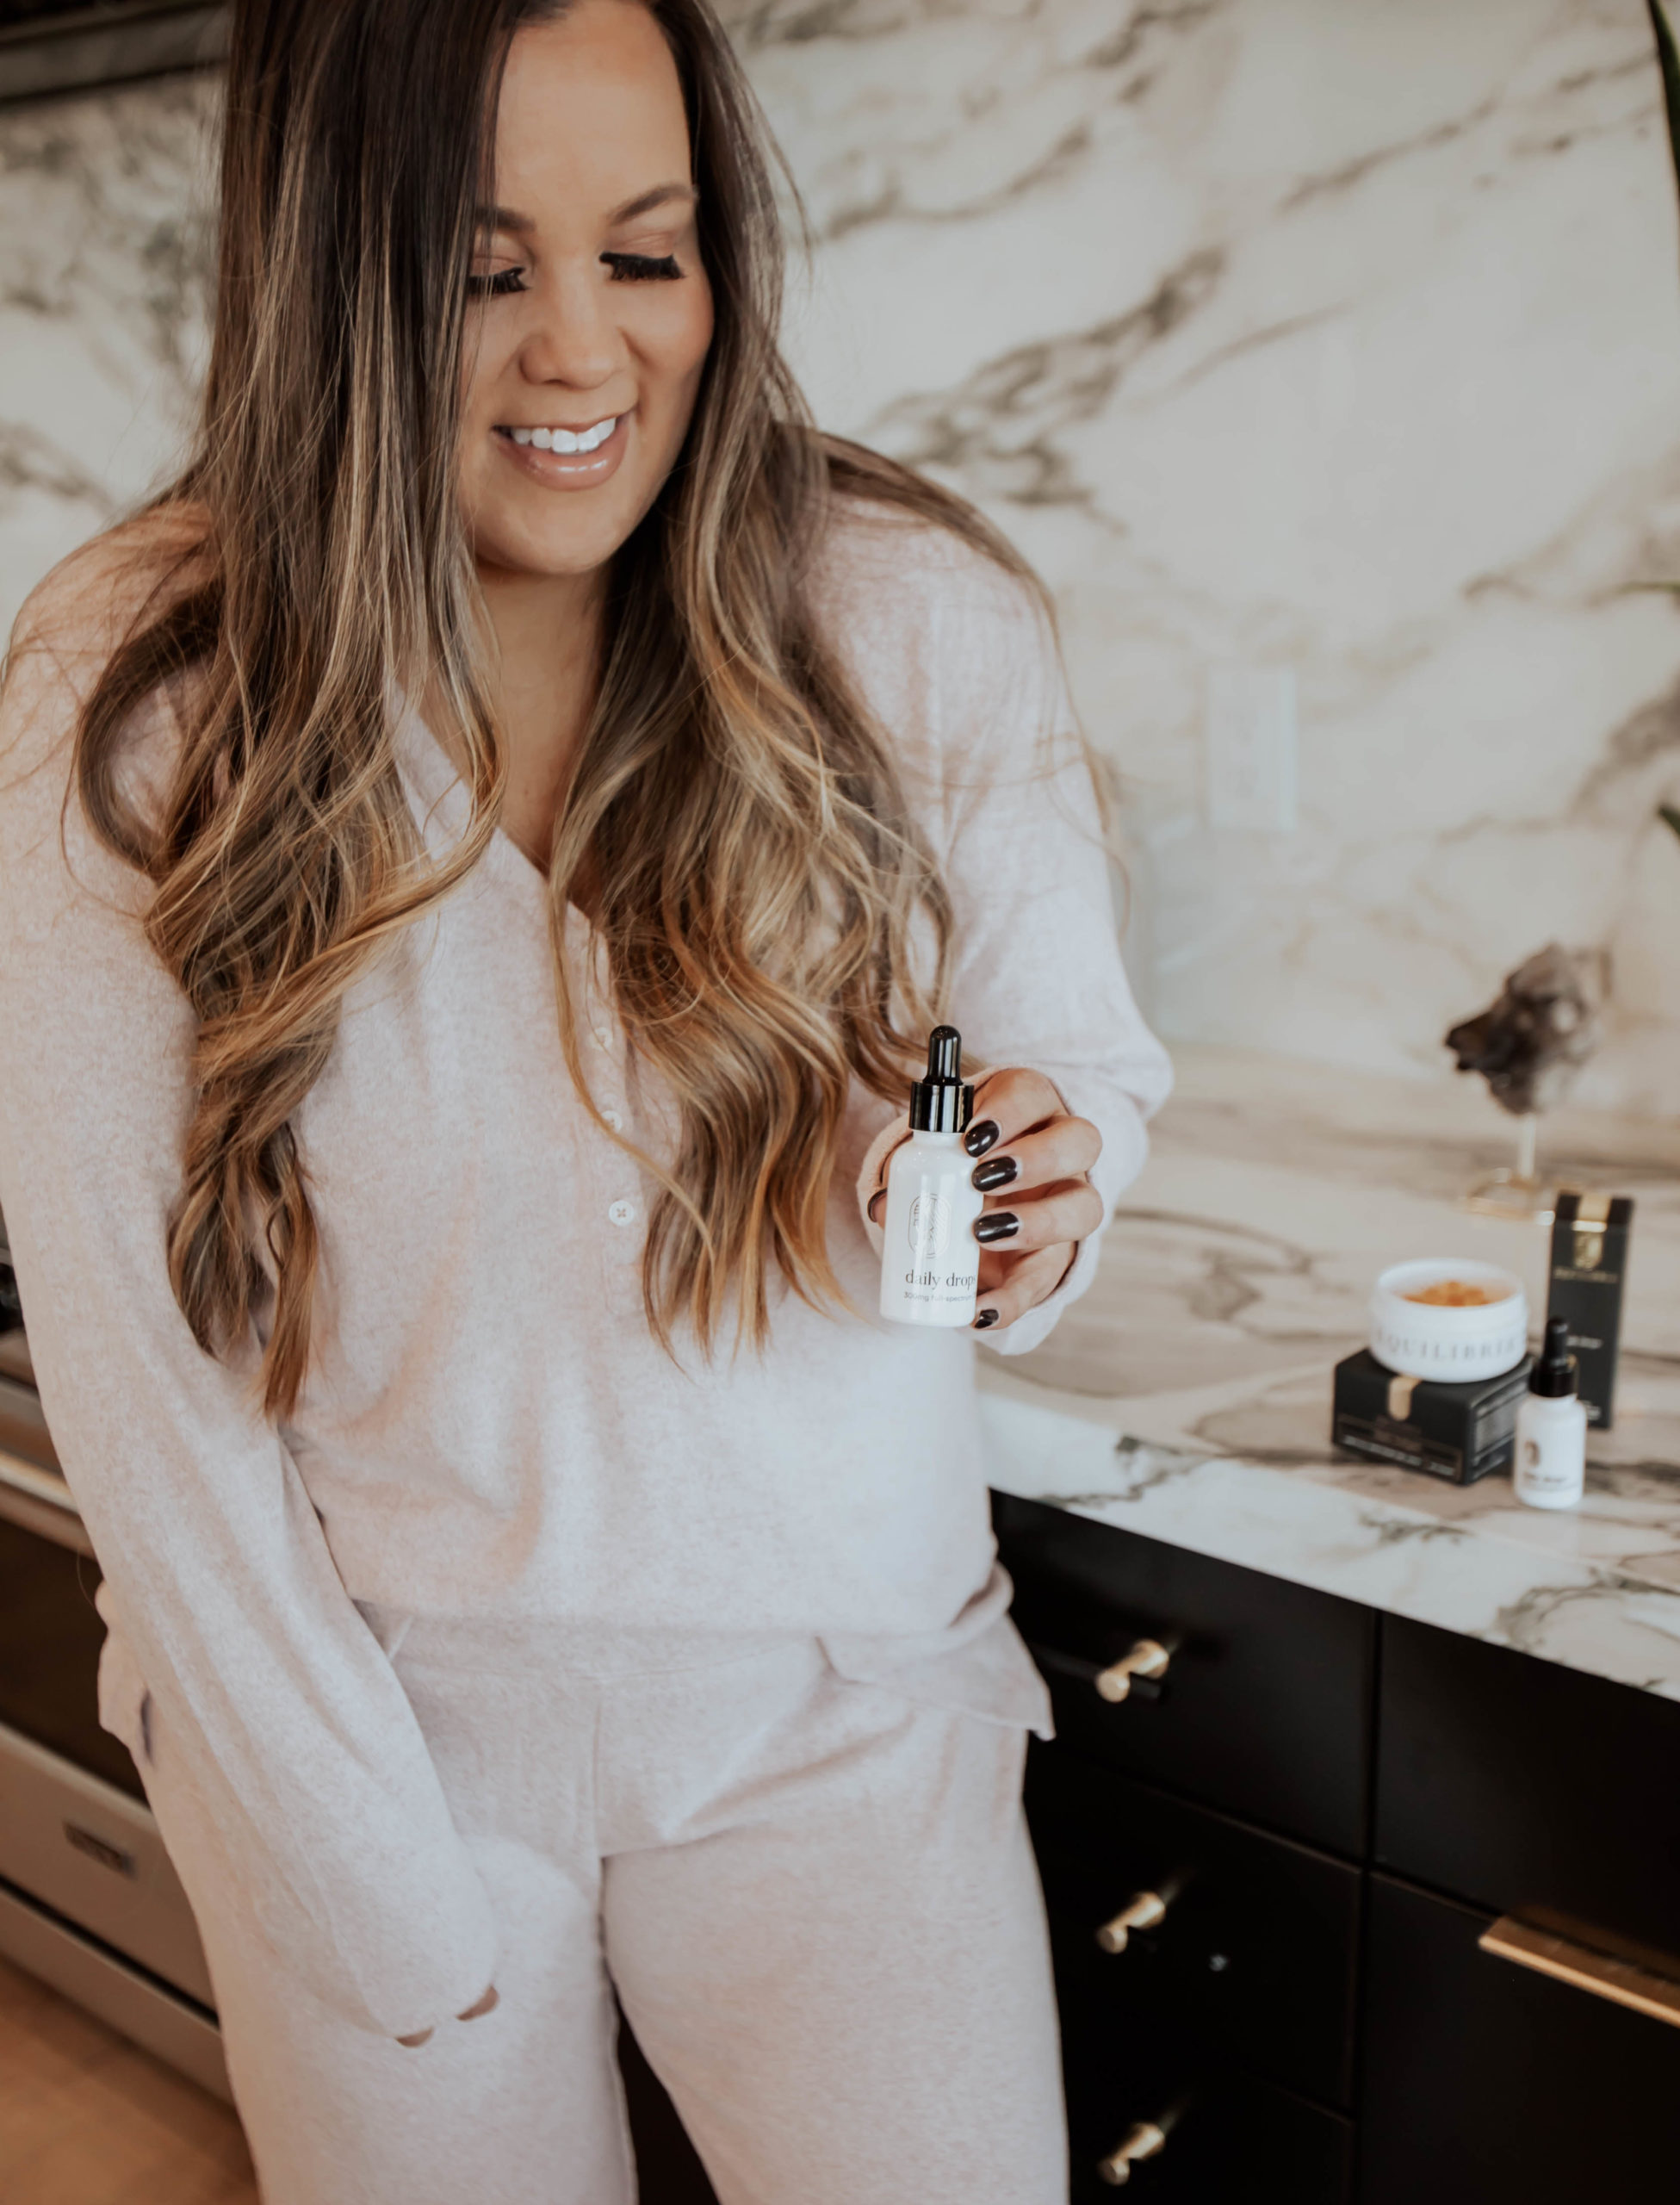 Reno blogger, Ashley Zeal Hurd, from The Ashley and Emily Blog shares "My Anxiety Story" and how she uses Equilibria CBD to cope. 